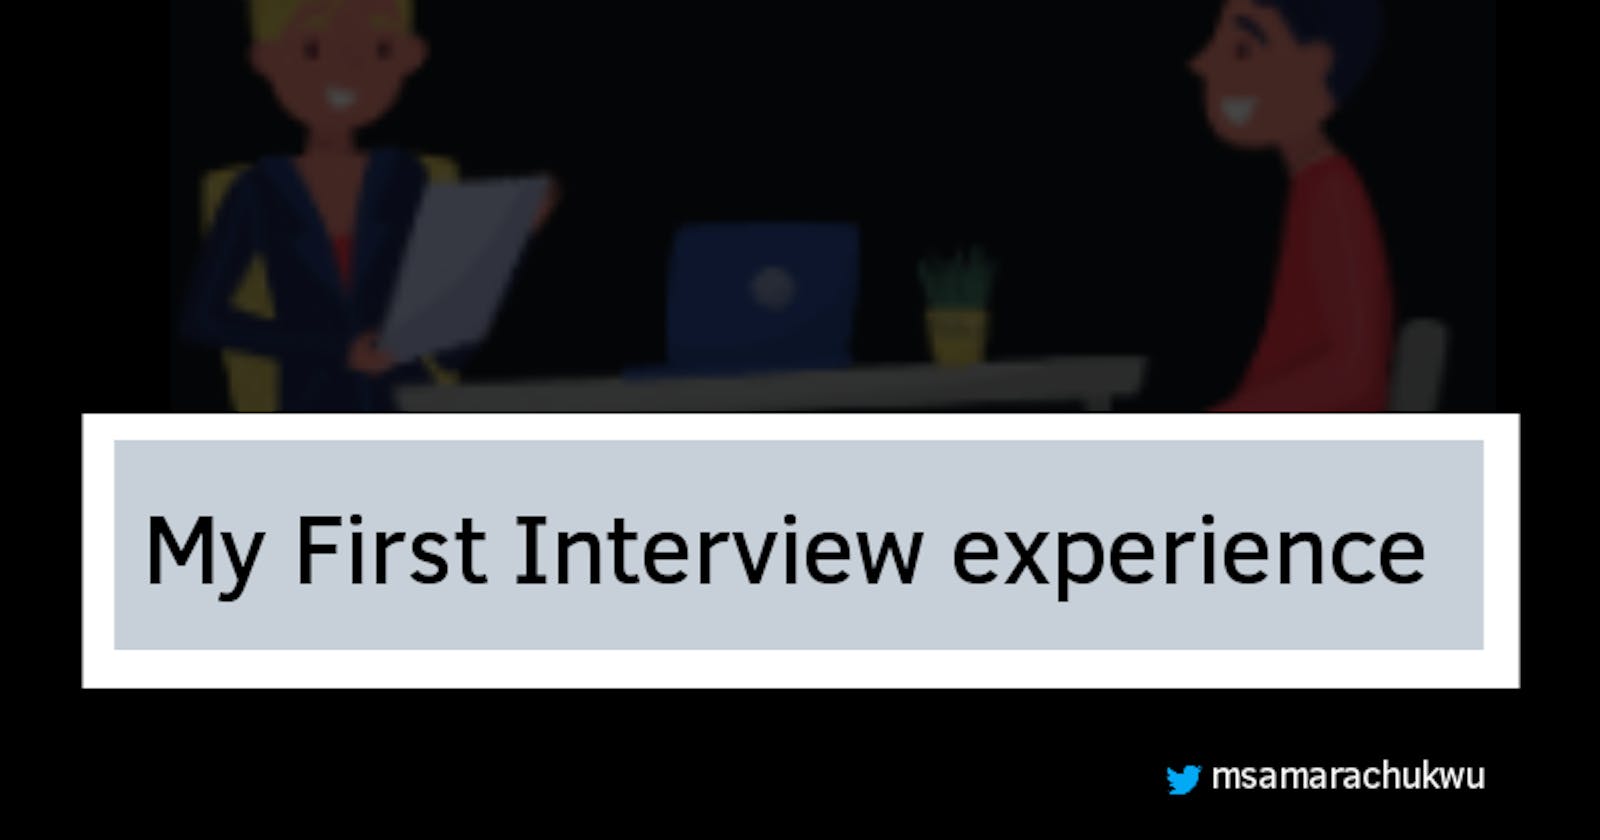 My First Interview experience